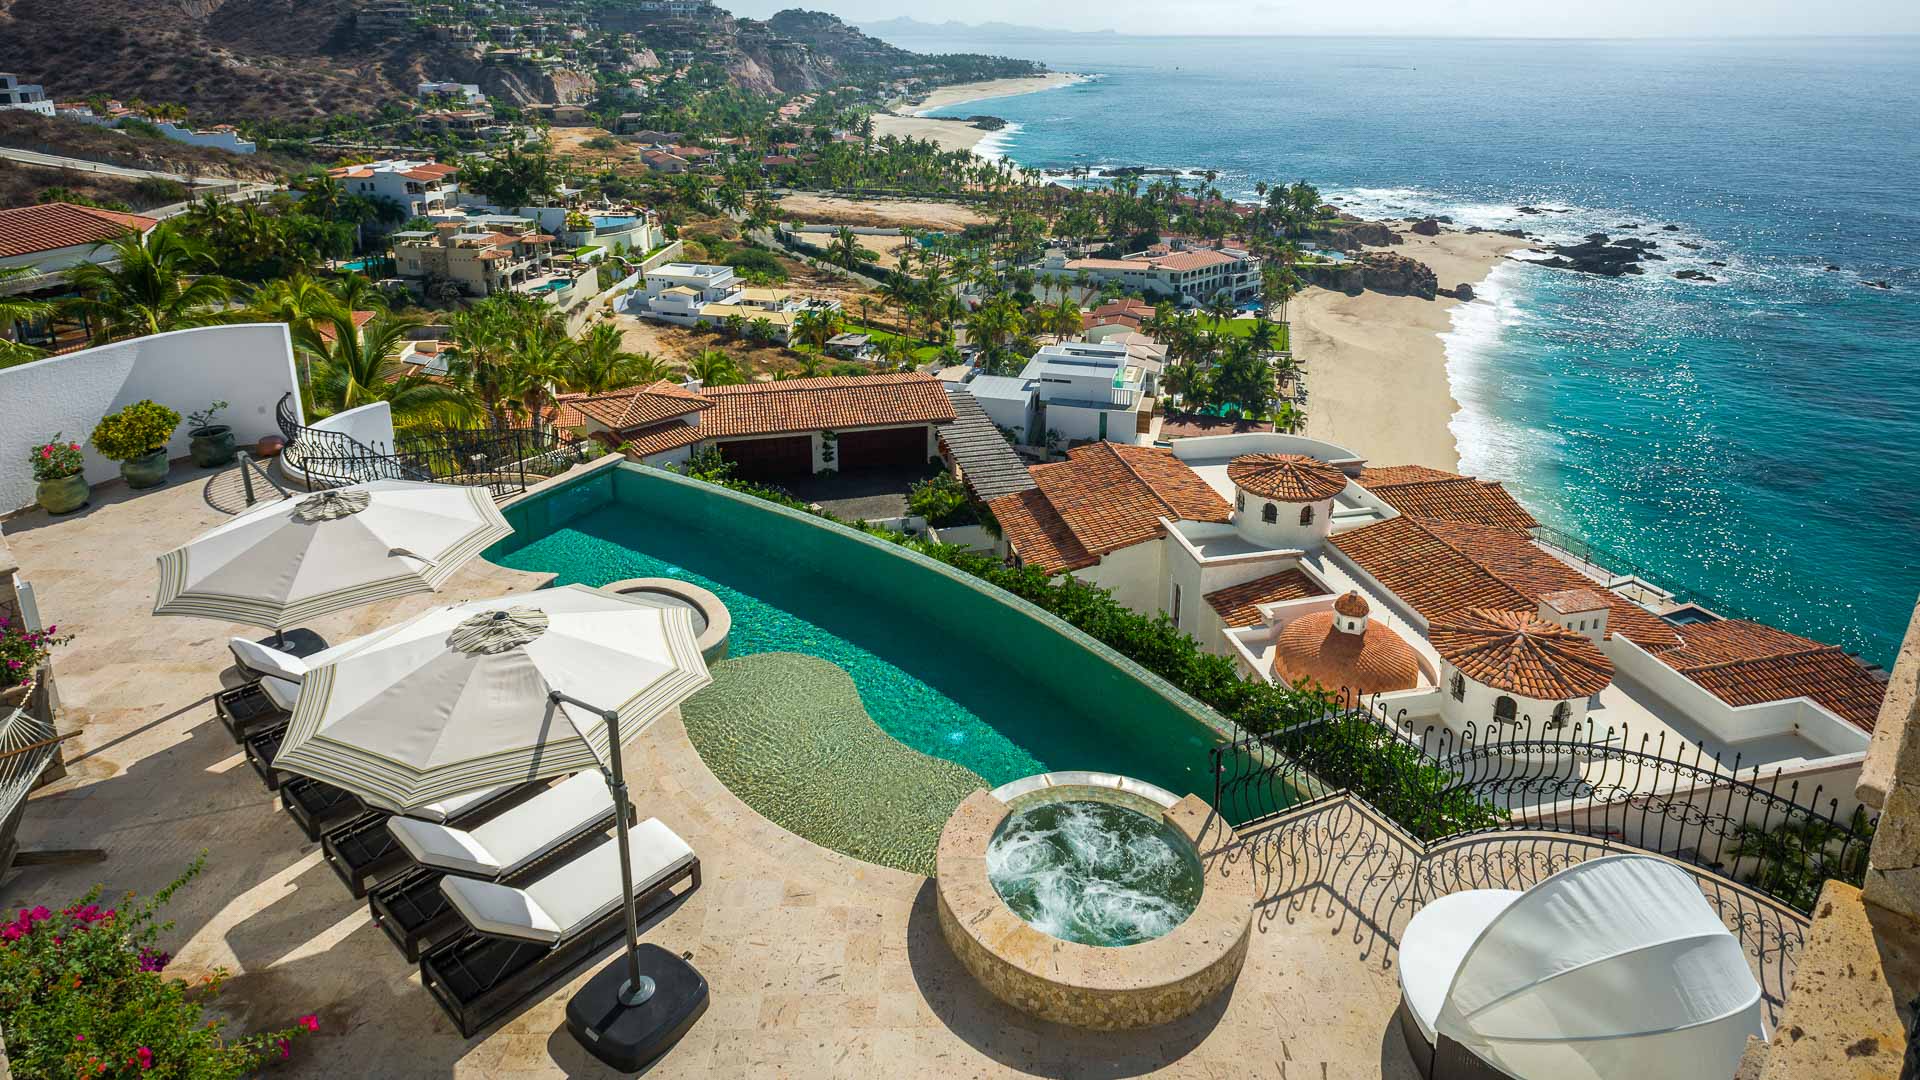 Property Image 2 - Classy Cliffside Villa with Private Pool in Los Cabos